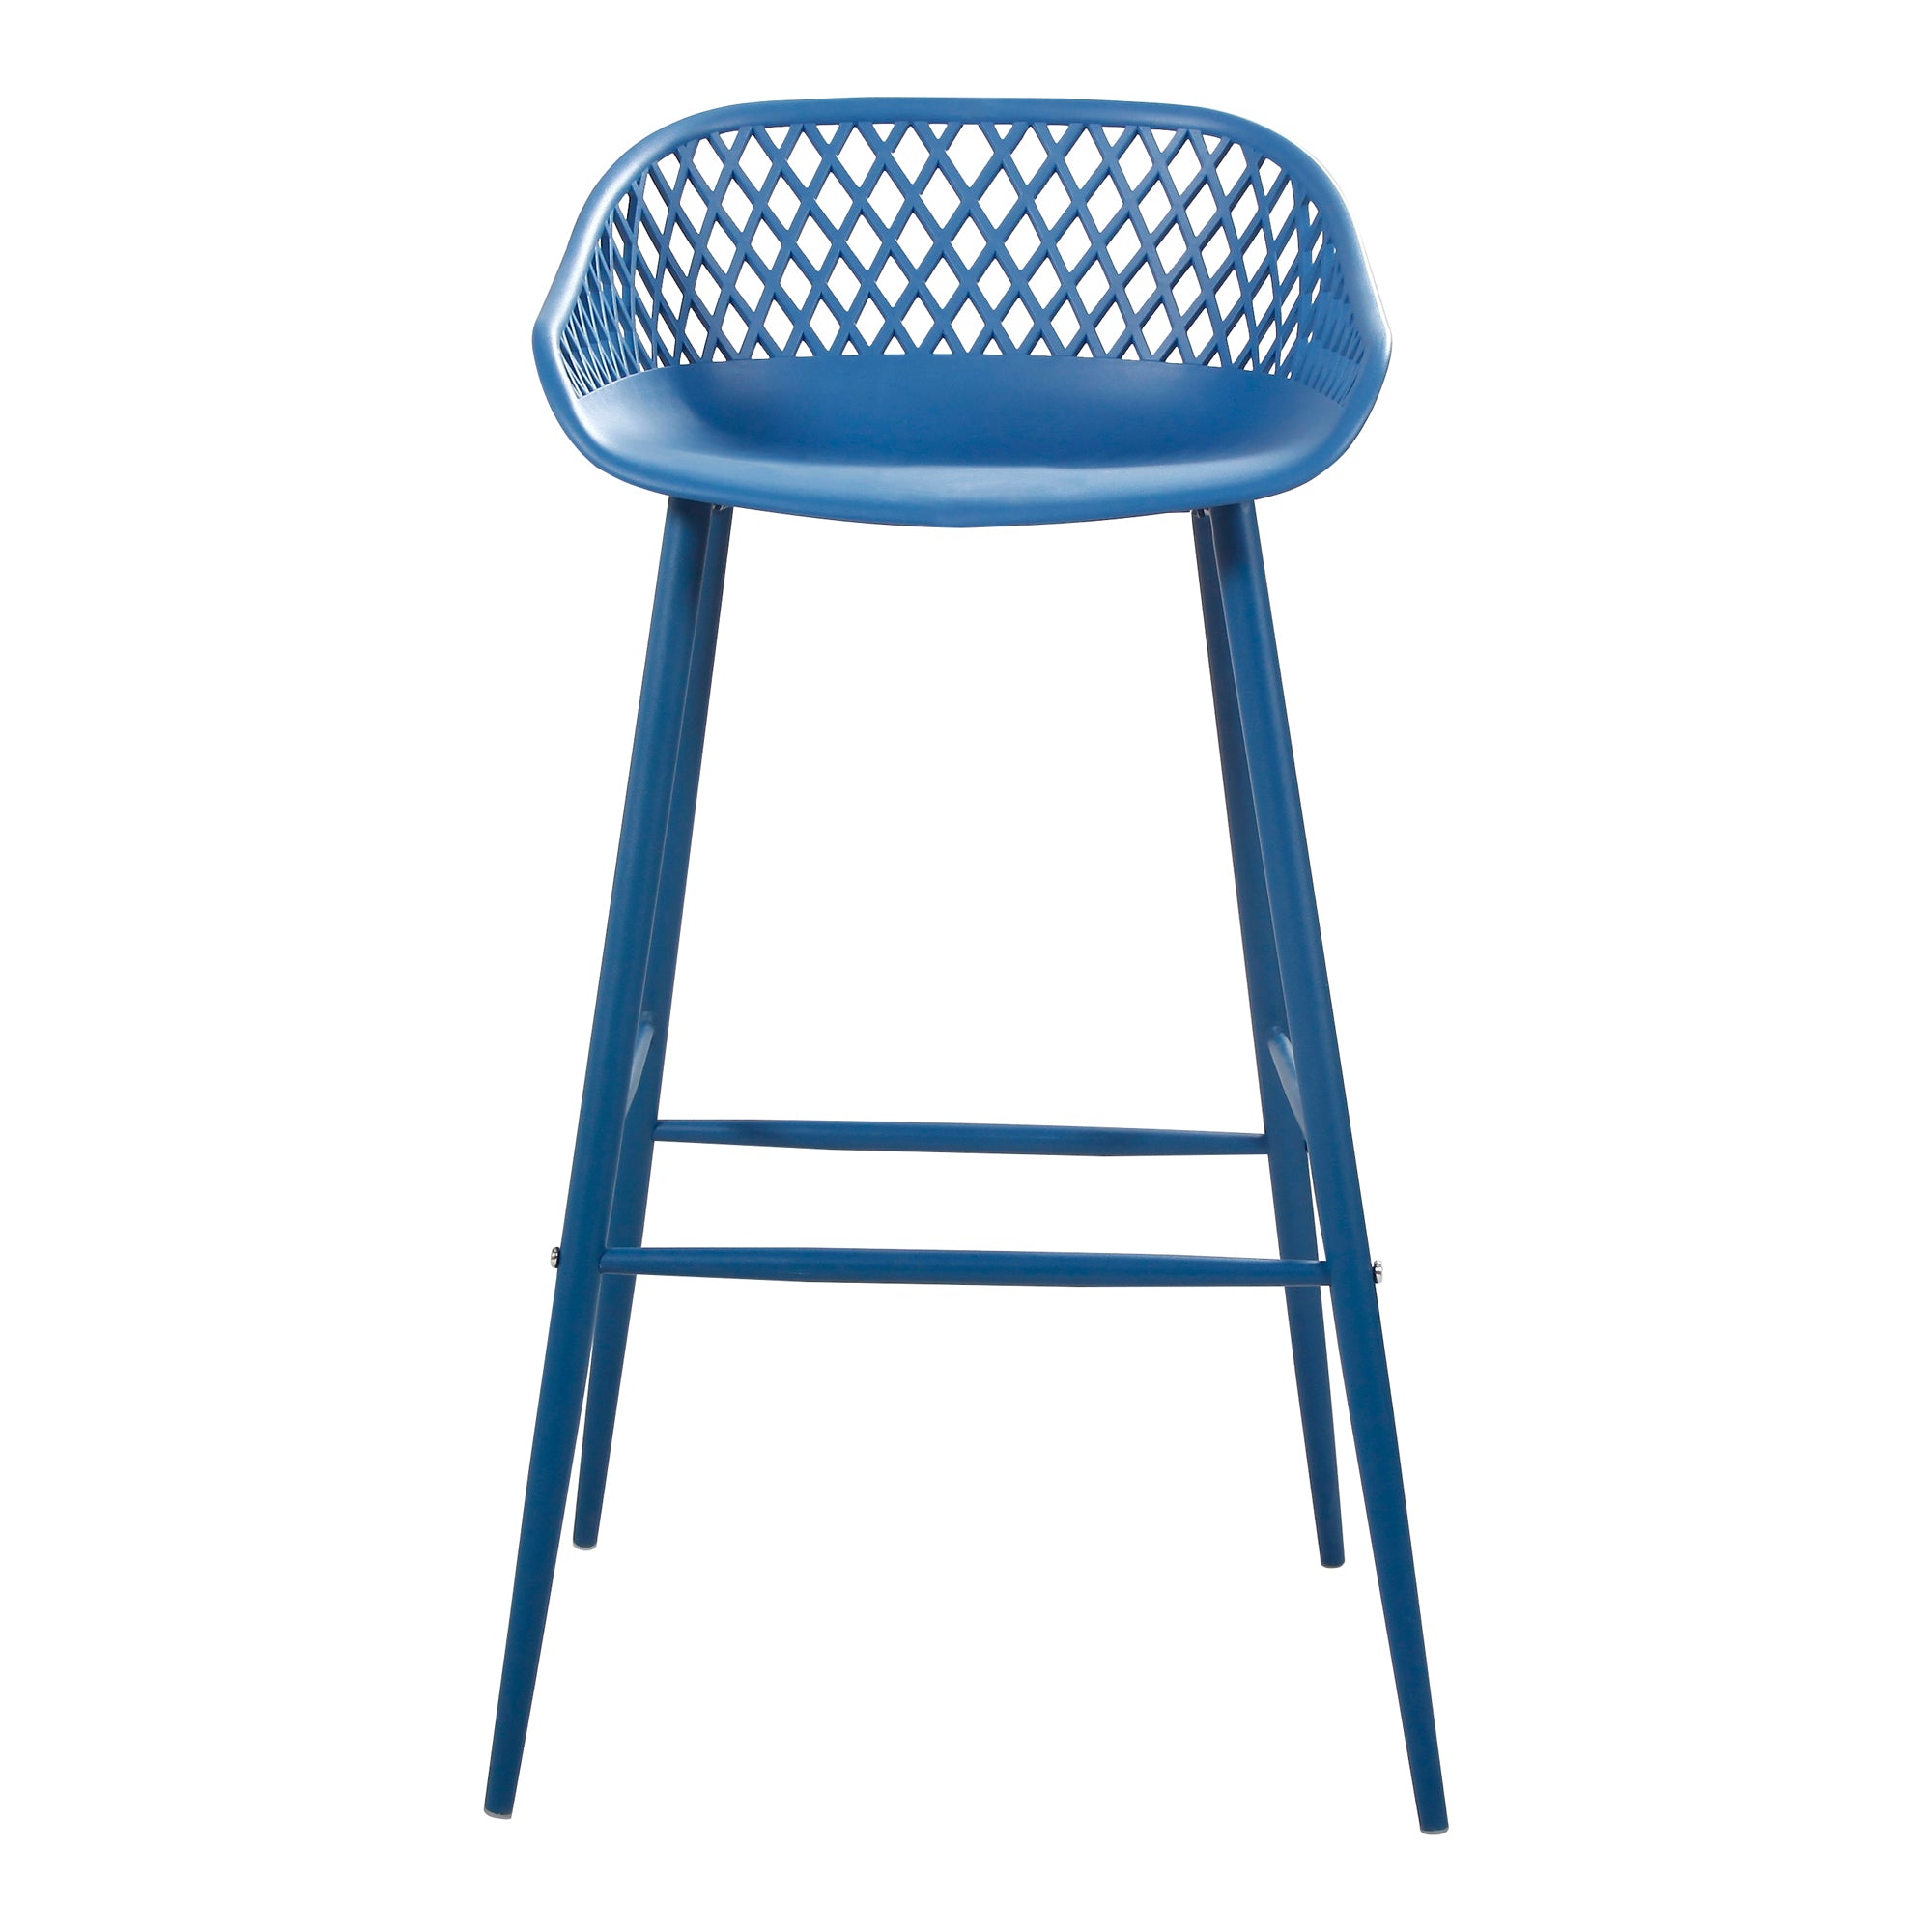 Piazza Outdoor Barstool - Set of 2